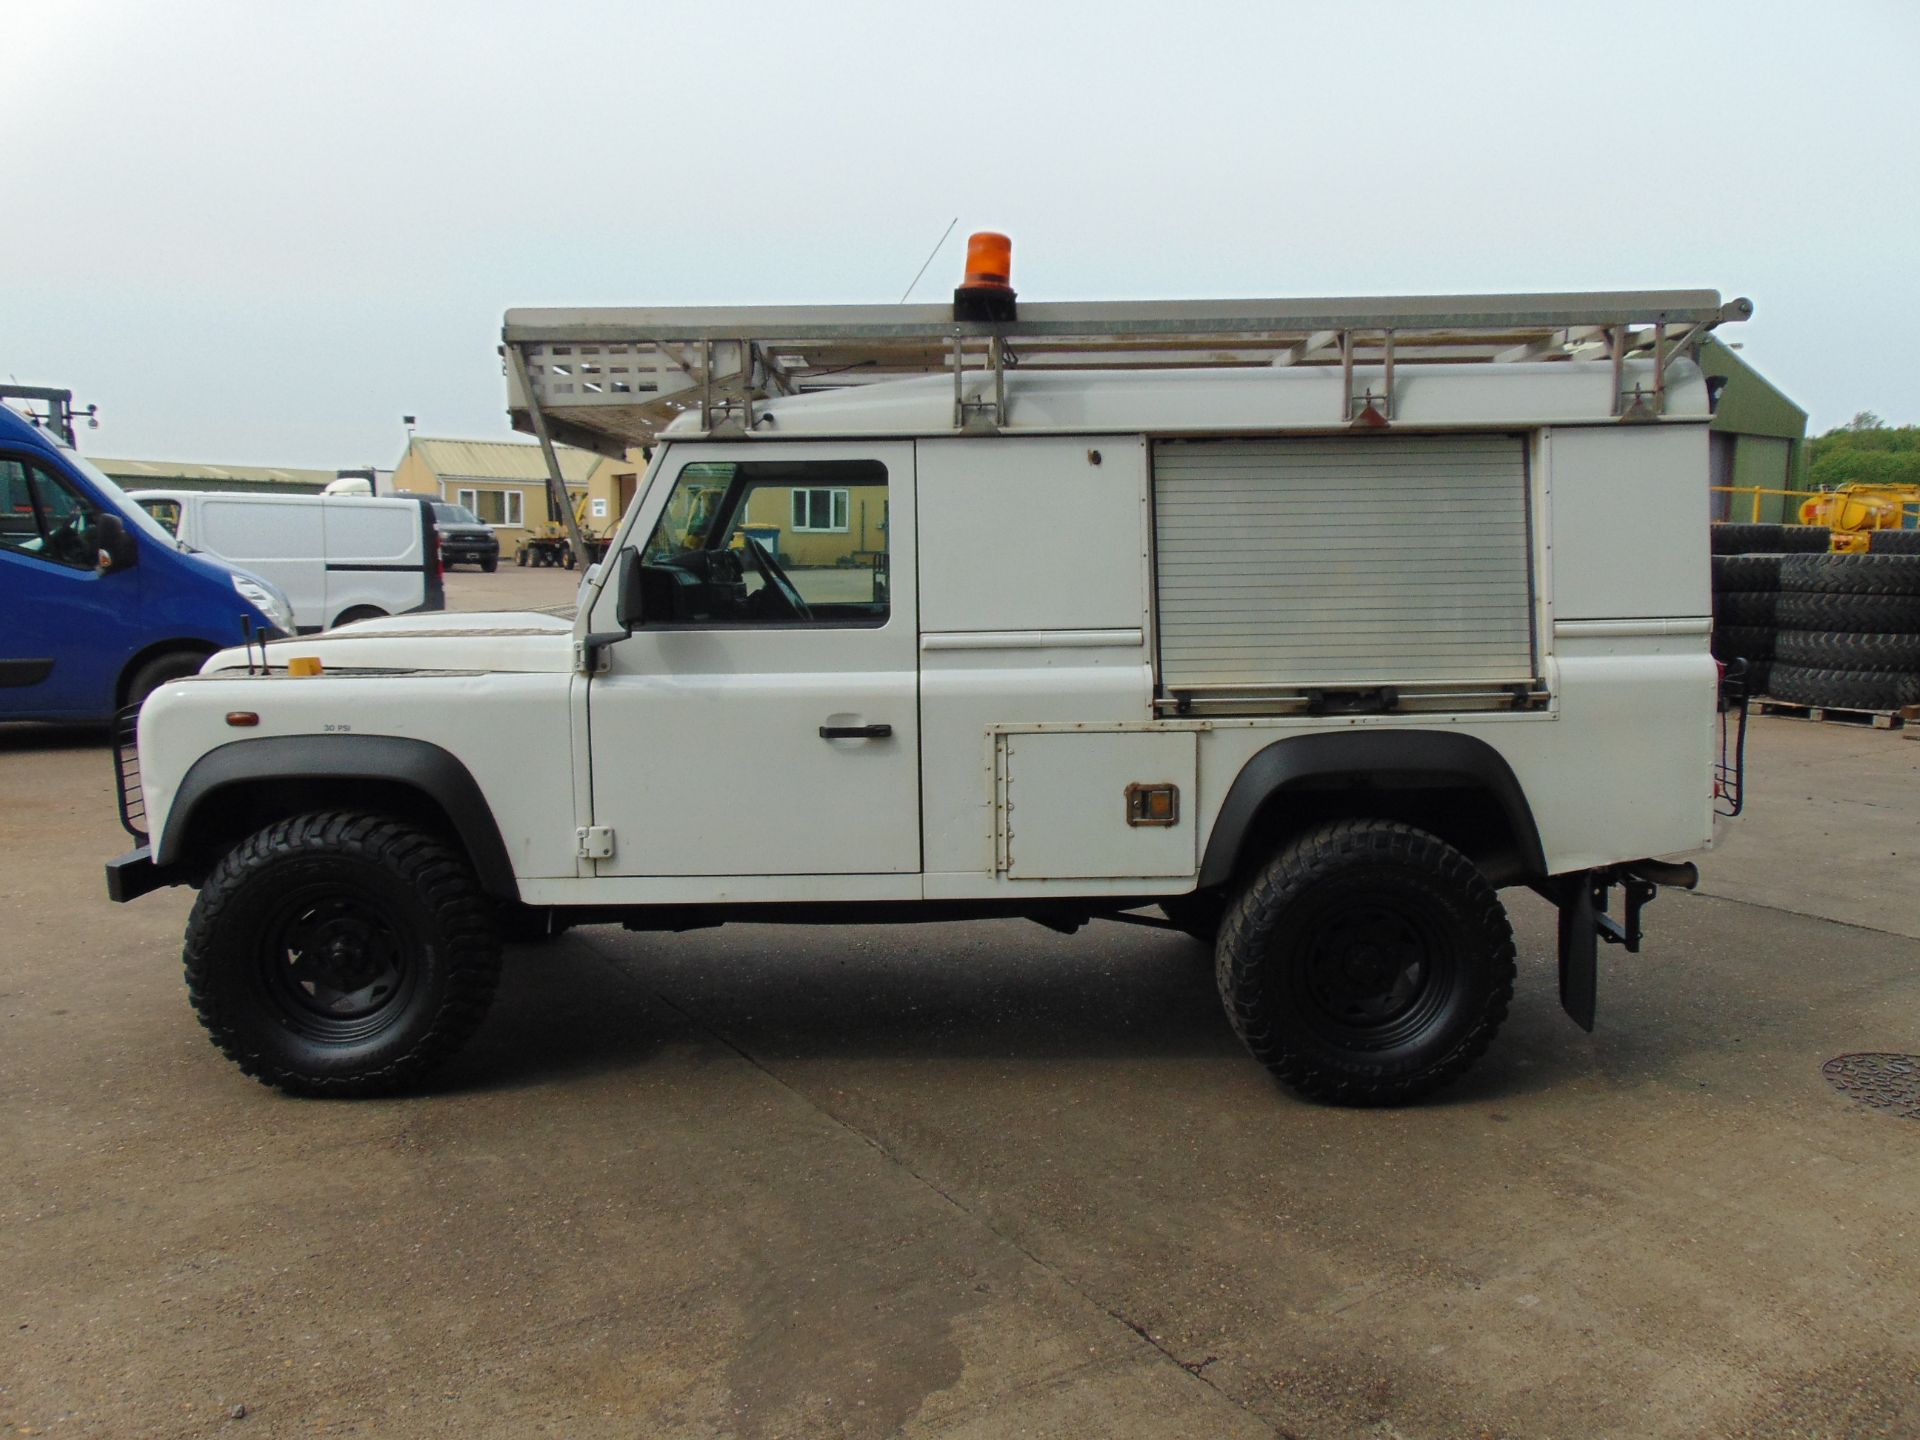 2013 Land Rover Defender 110 Puma hardtop 4x4 Utility vehicle (mobile workshop) with hydraulic winch - Image 6 of 44